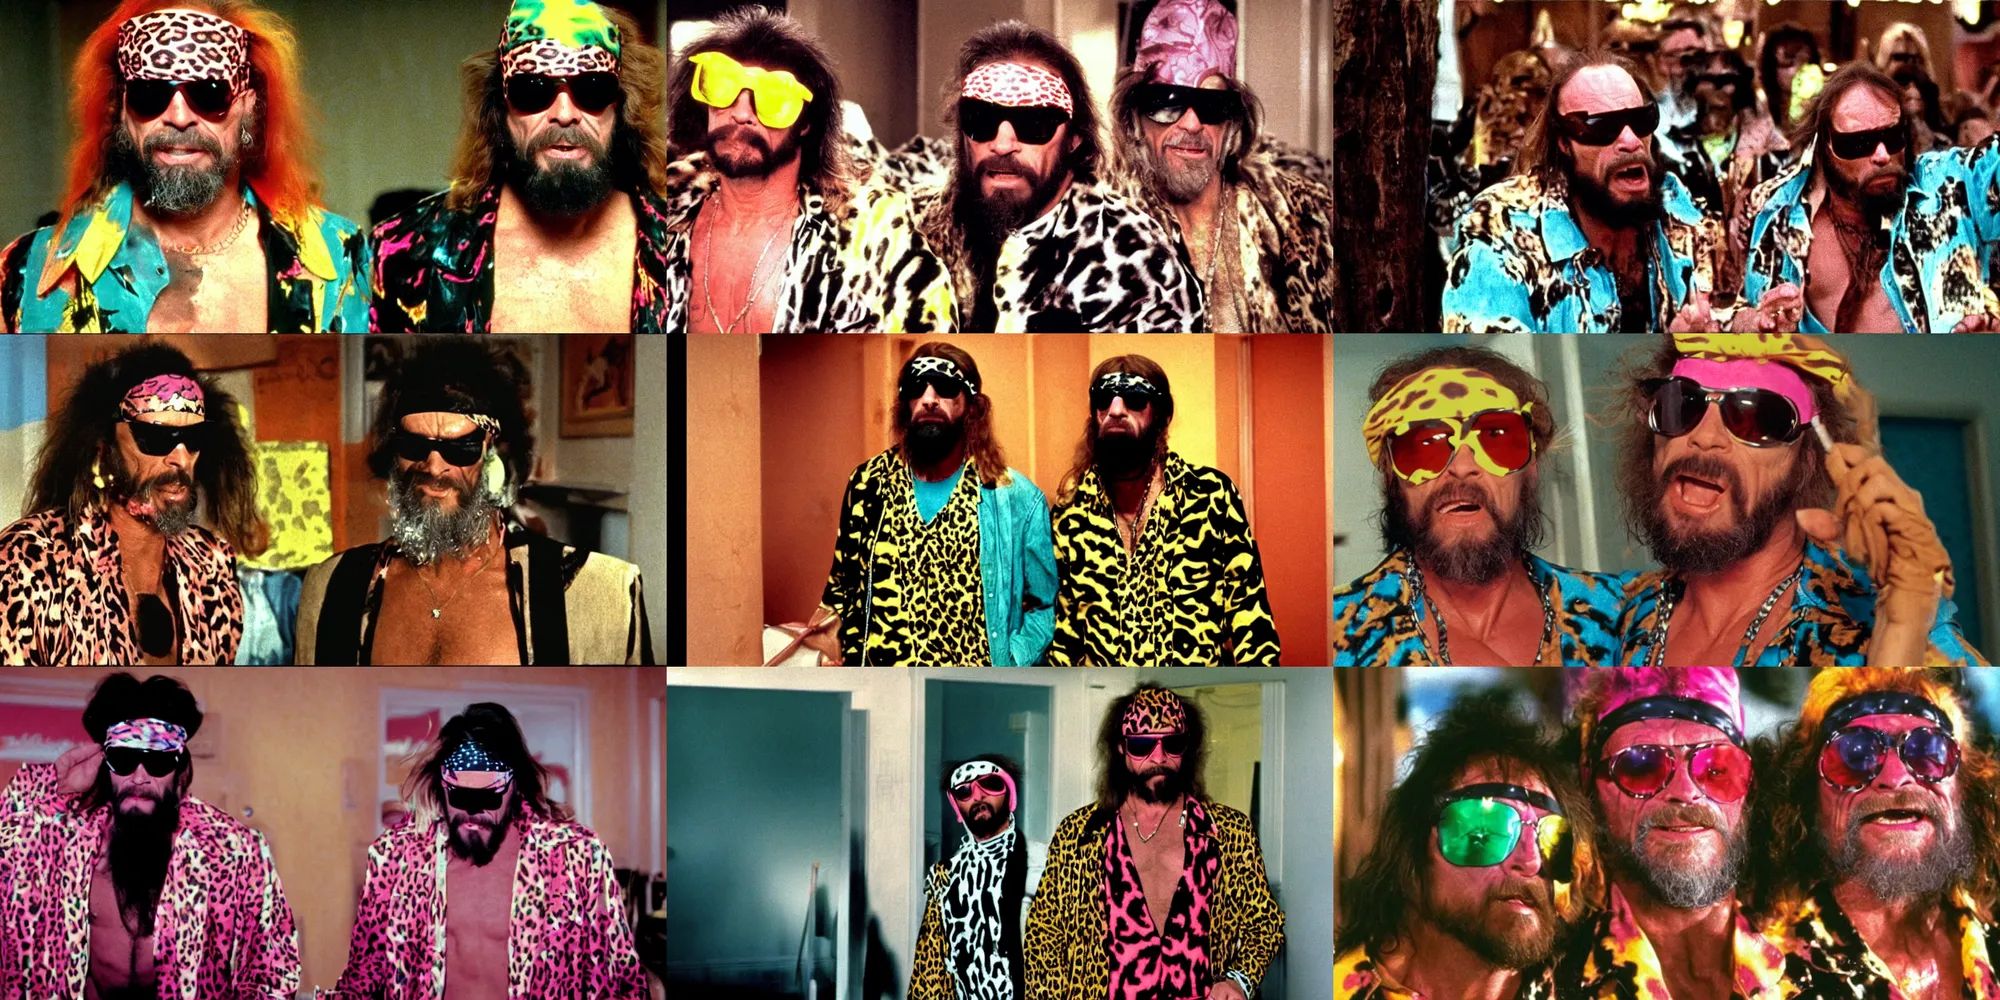 Prompt: Matcho Man Randy Savage, wearing sunglasses, neon leopard print clothes, in The Shining 1980, film still